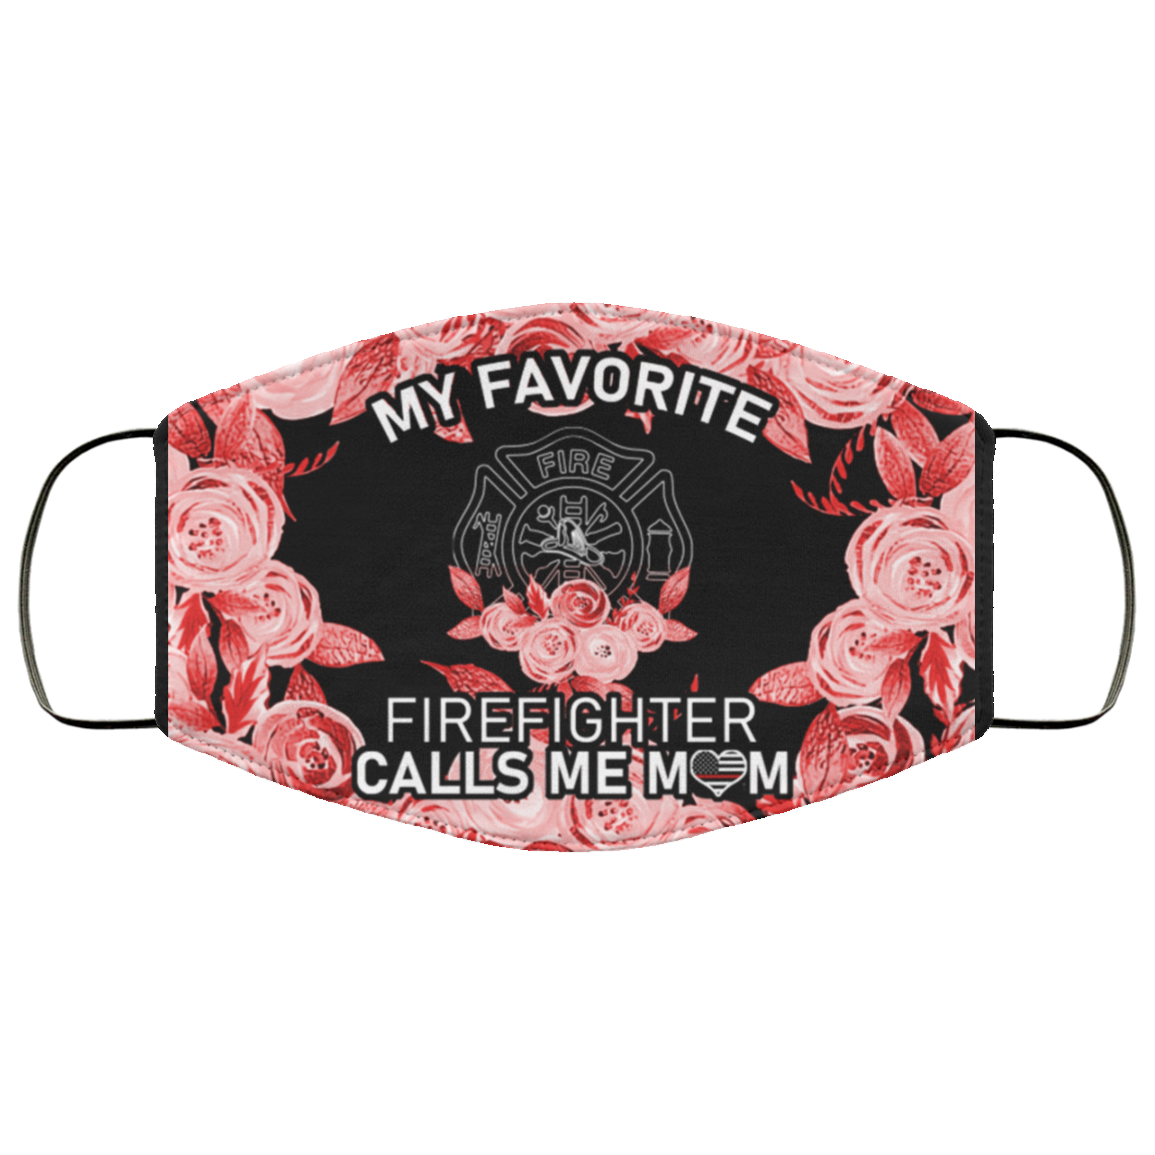 My Favorite Firefighter Calls Me Mom Face Mask 2